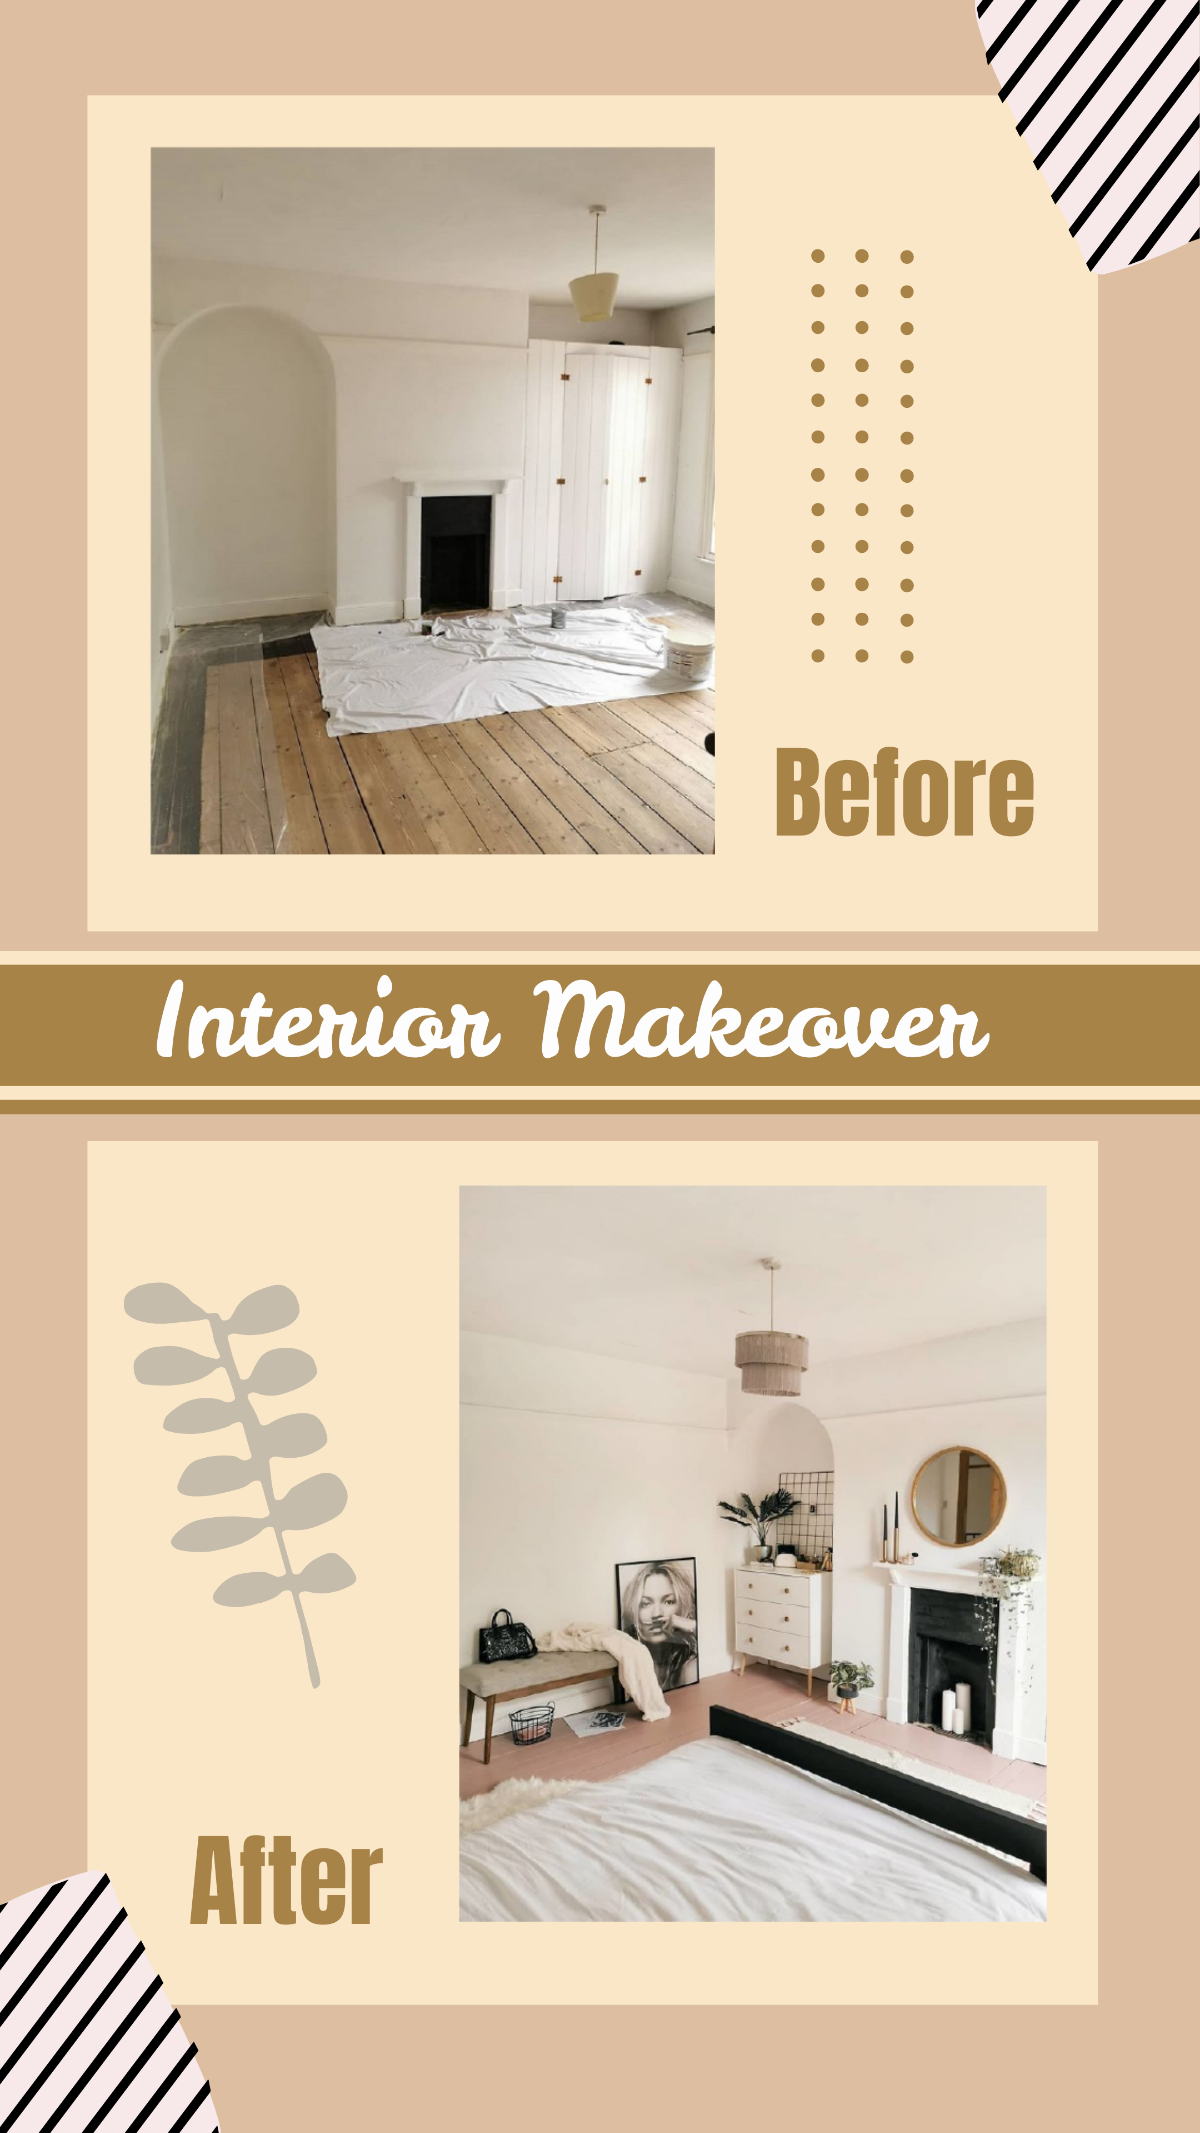 Before and After Interior Instagram Story